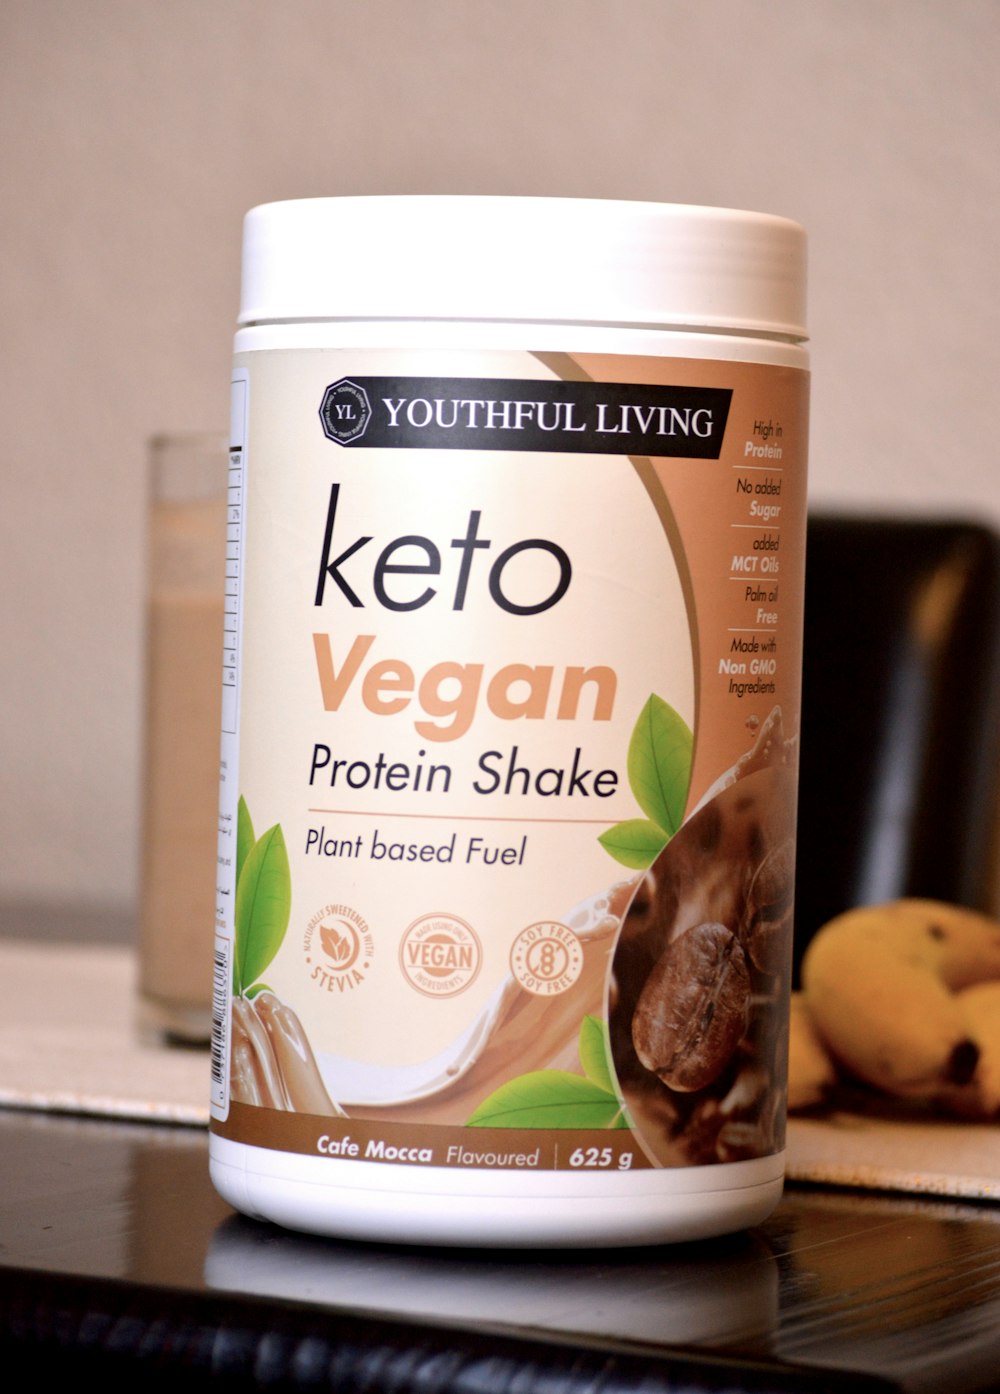 a bottle of keto vegan protein shake sitting on a table